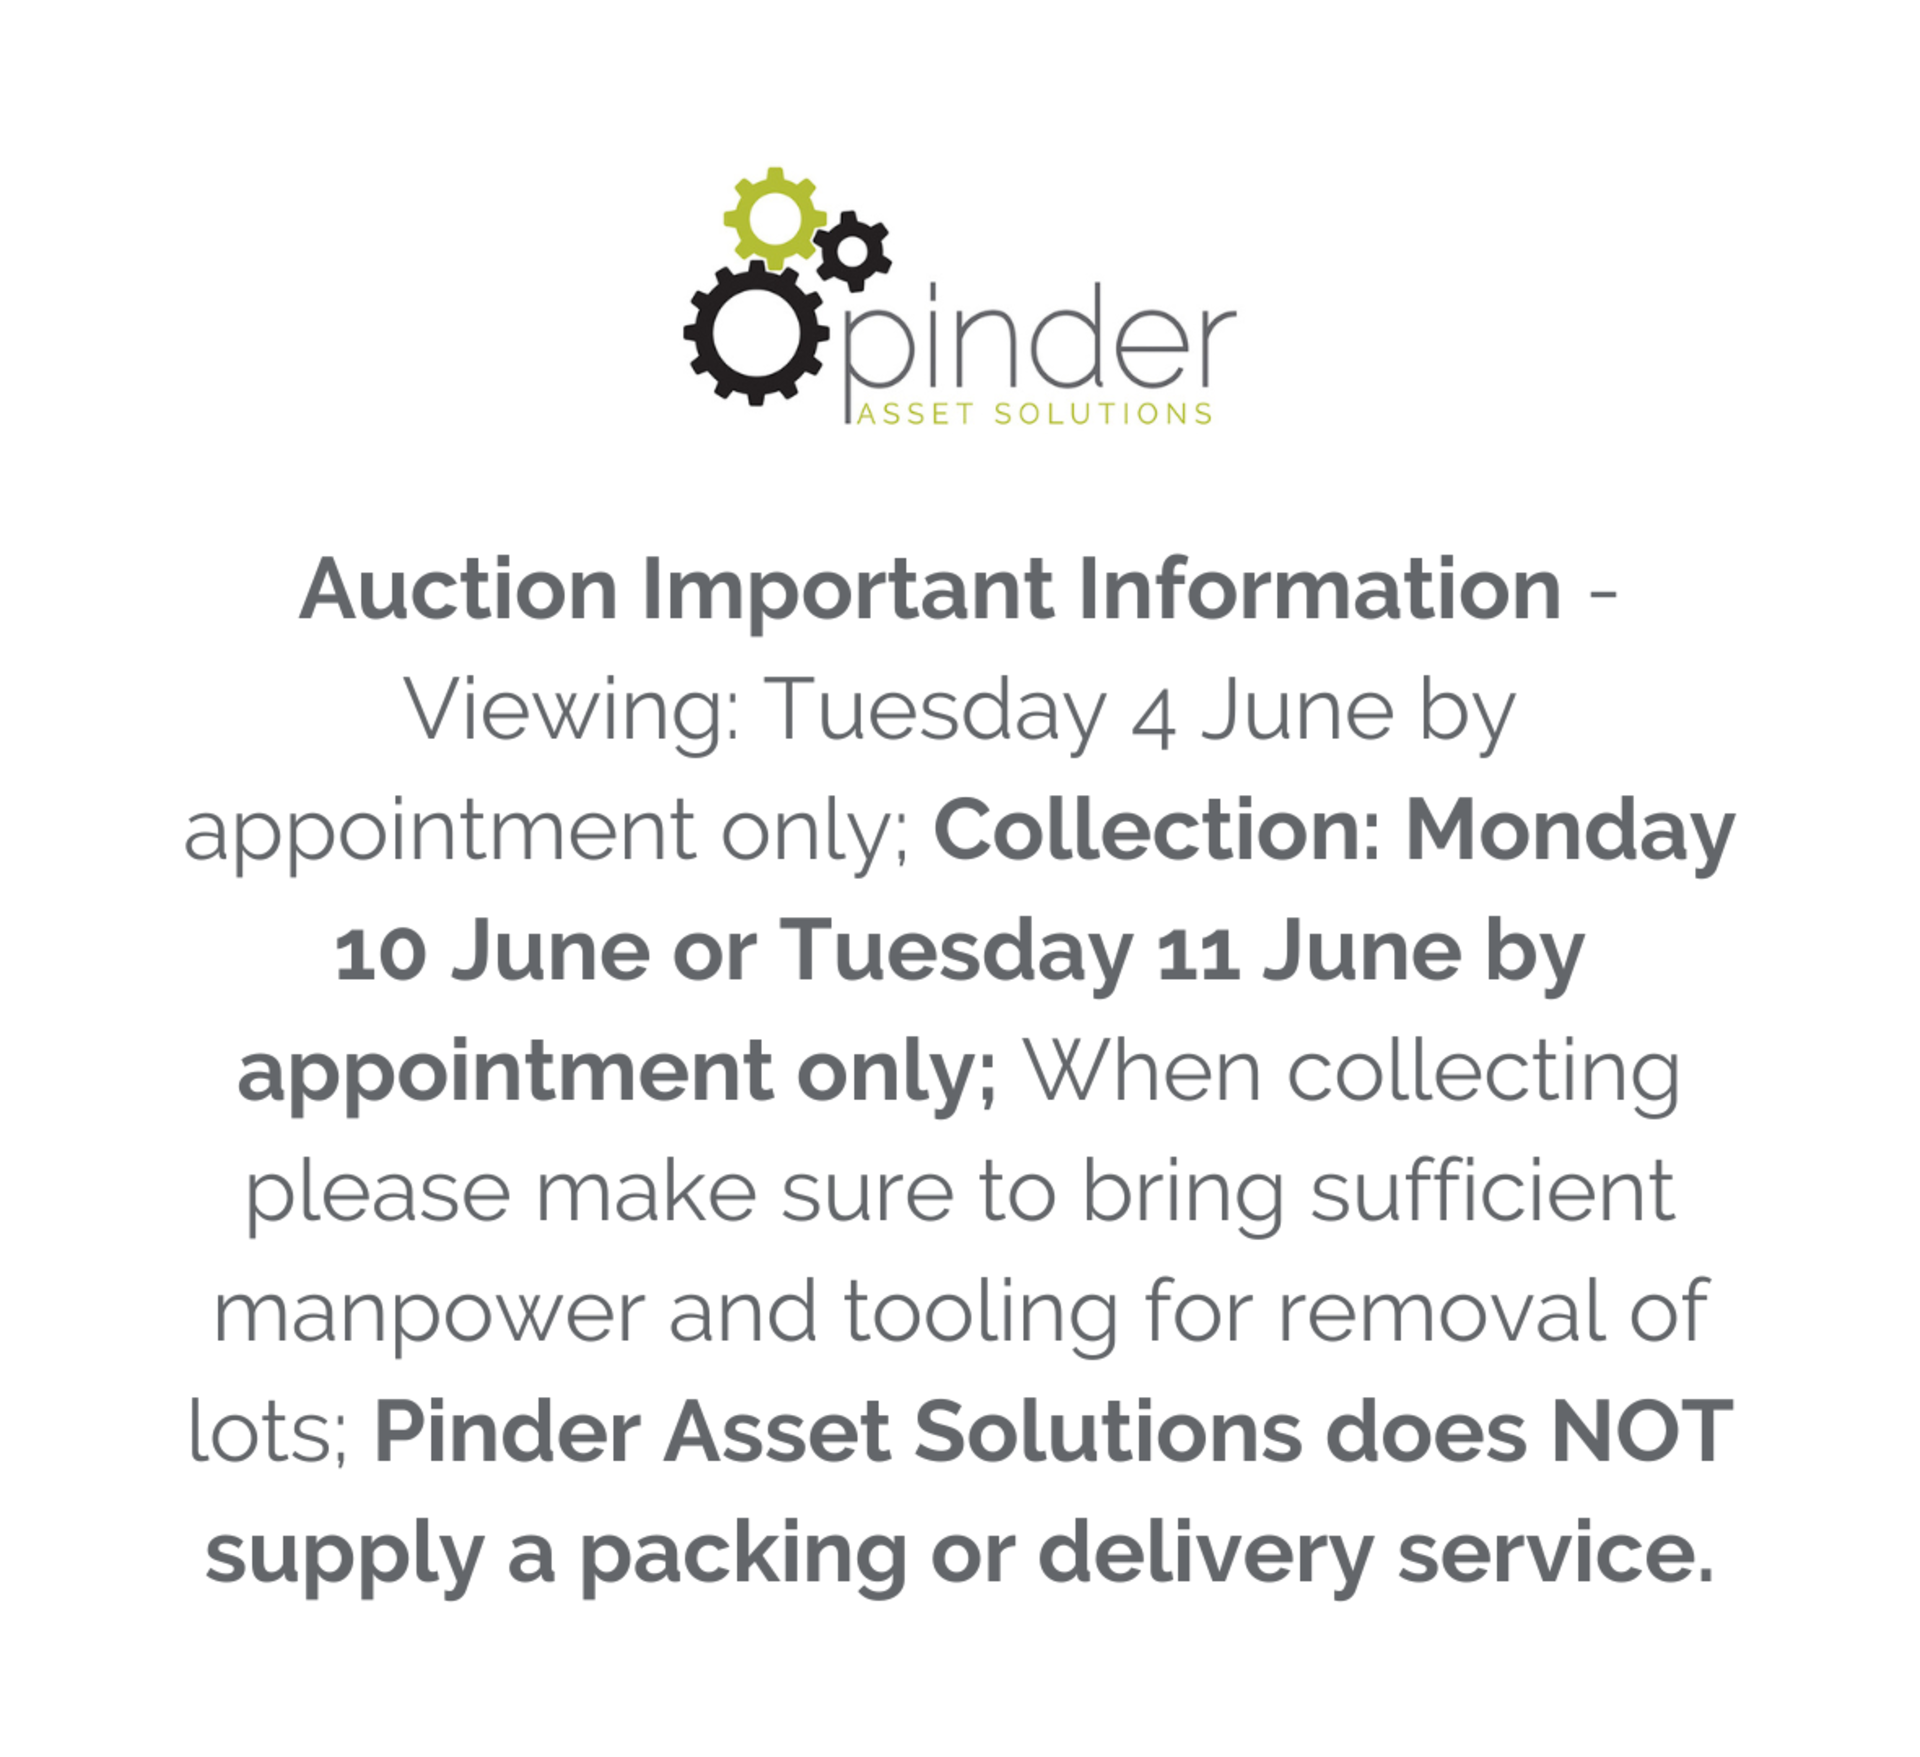 Auction Important Information - Viewing: Tuesday 4 June by appointment only; Collection: Monday 10